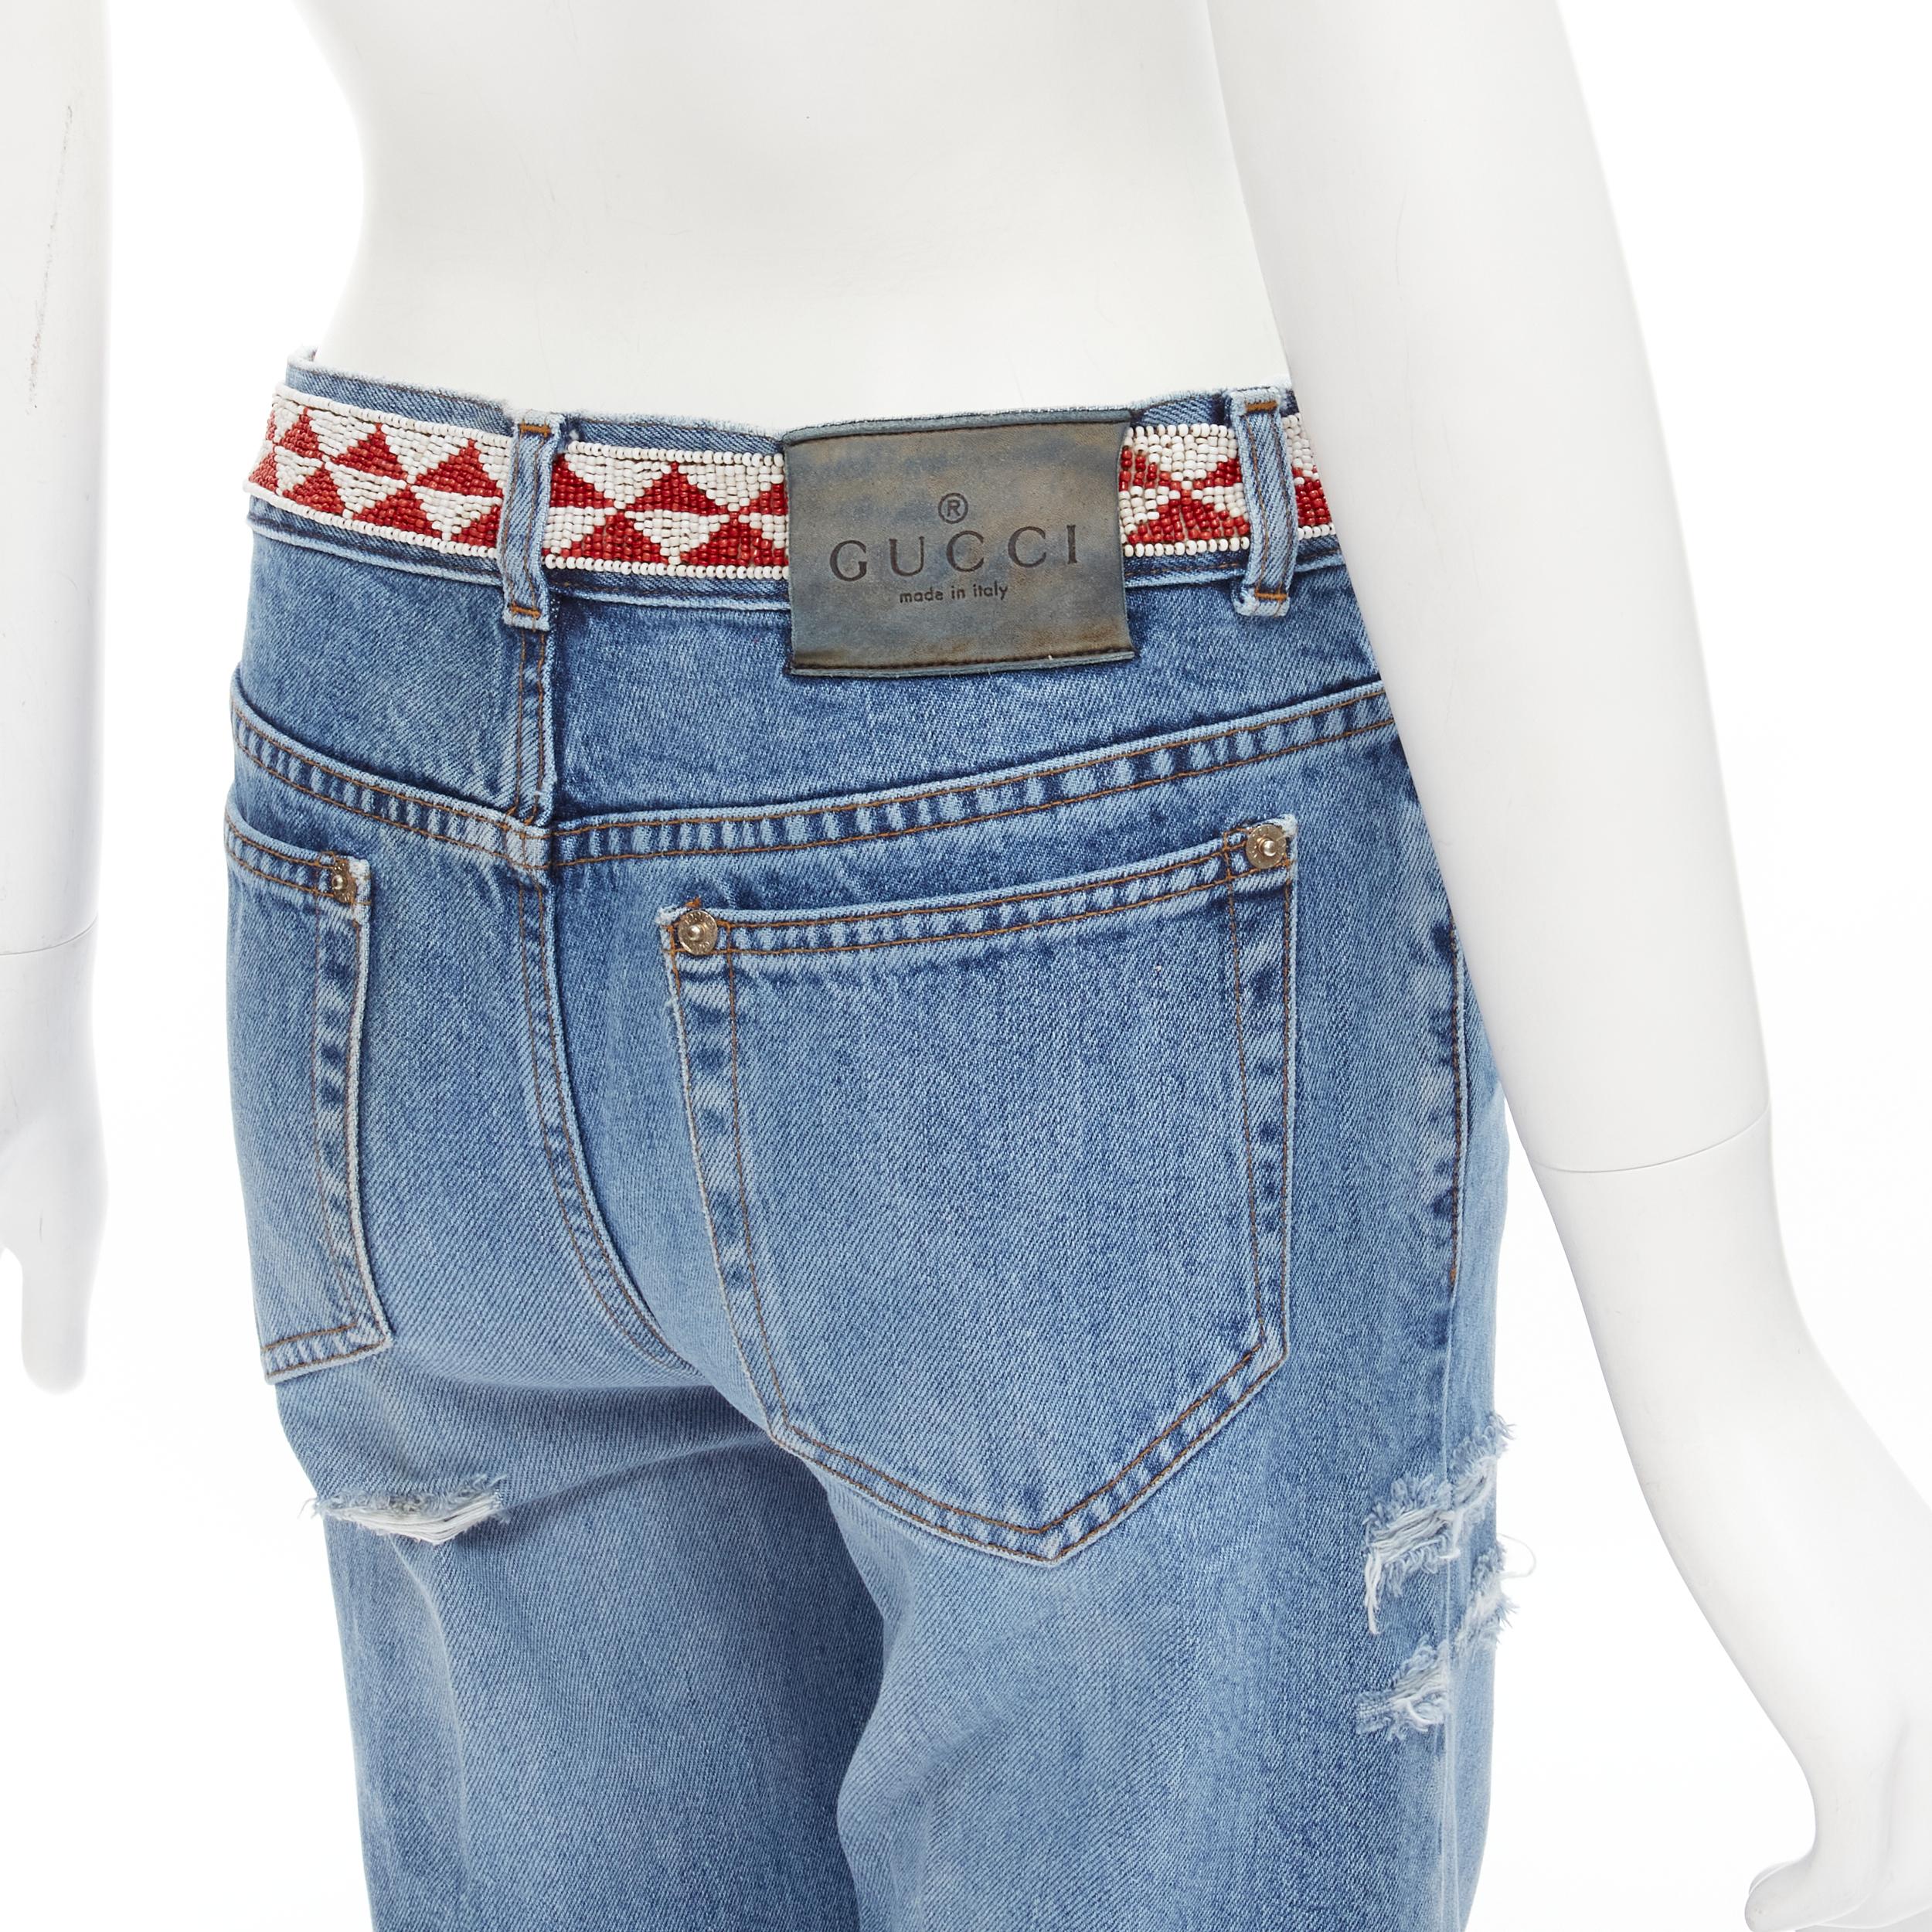 GUCCI 1999 Vintage aztec bead embroidery waist distressed denim jeans IT38 XS 
Reference: ANWU/A00570 
Brand: Gucci 
Collection: 1999 
Material: Denim 
Color: Blue 
Pattern: Solid 
Closure: Zip 
Extra Detail: 5-pocket design. Tribal bead embroidery